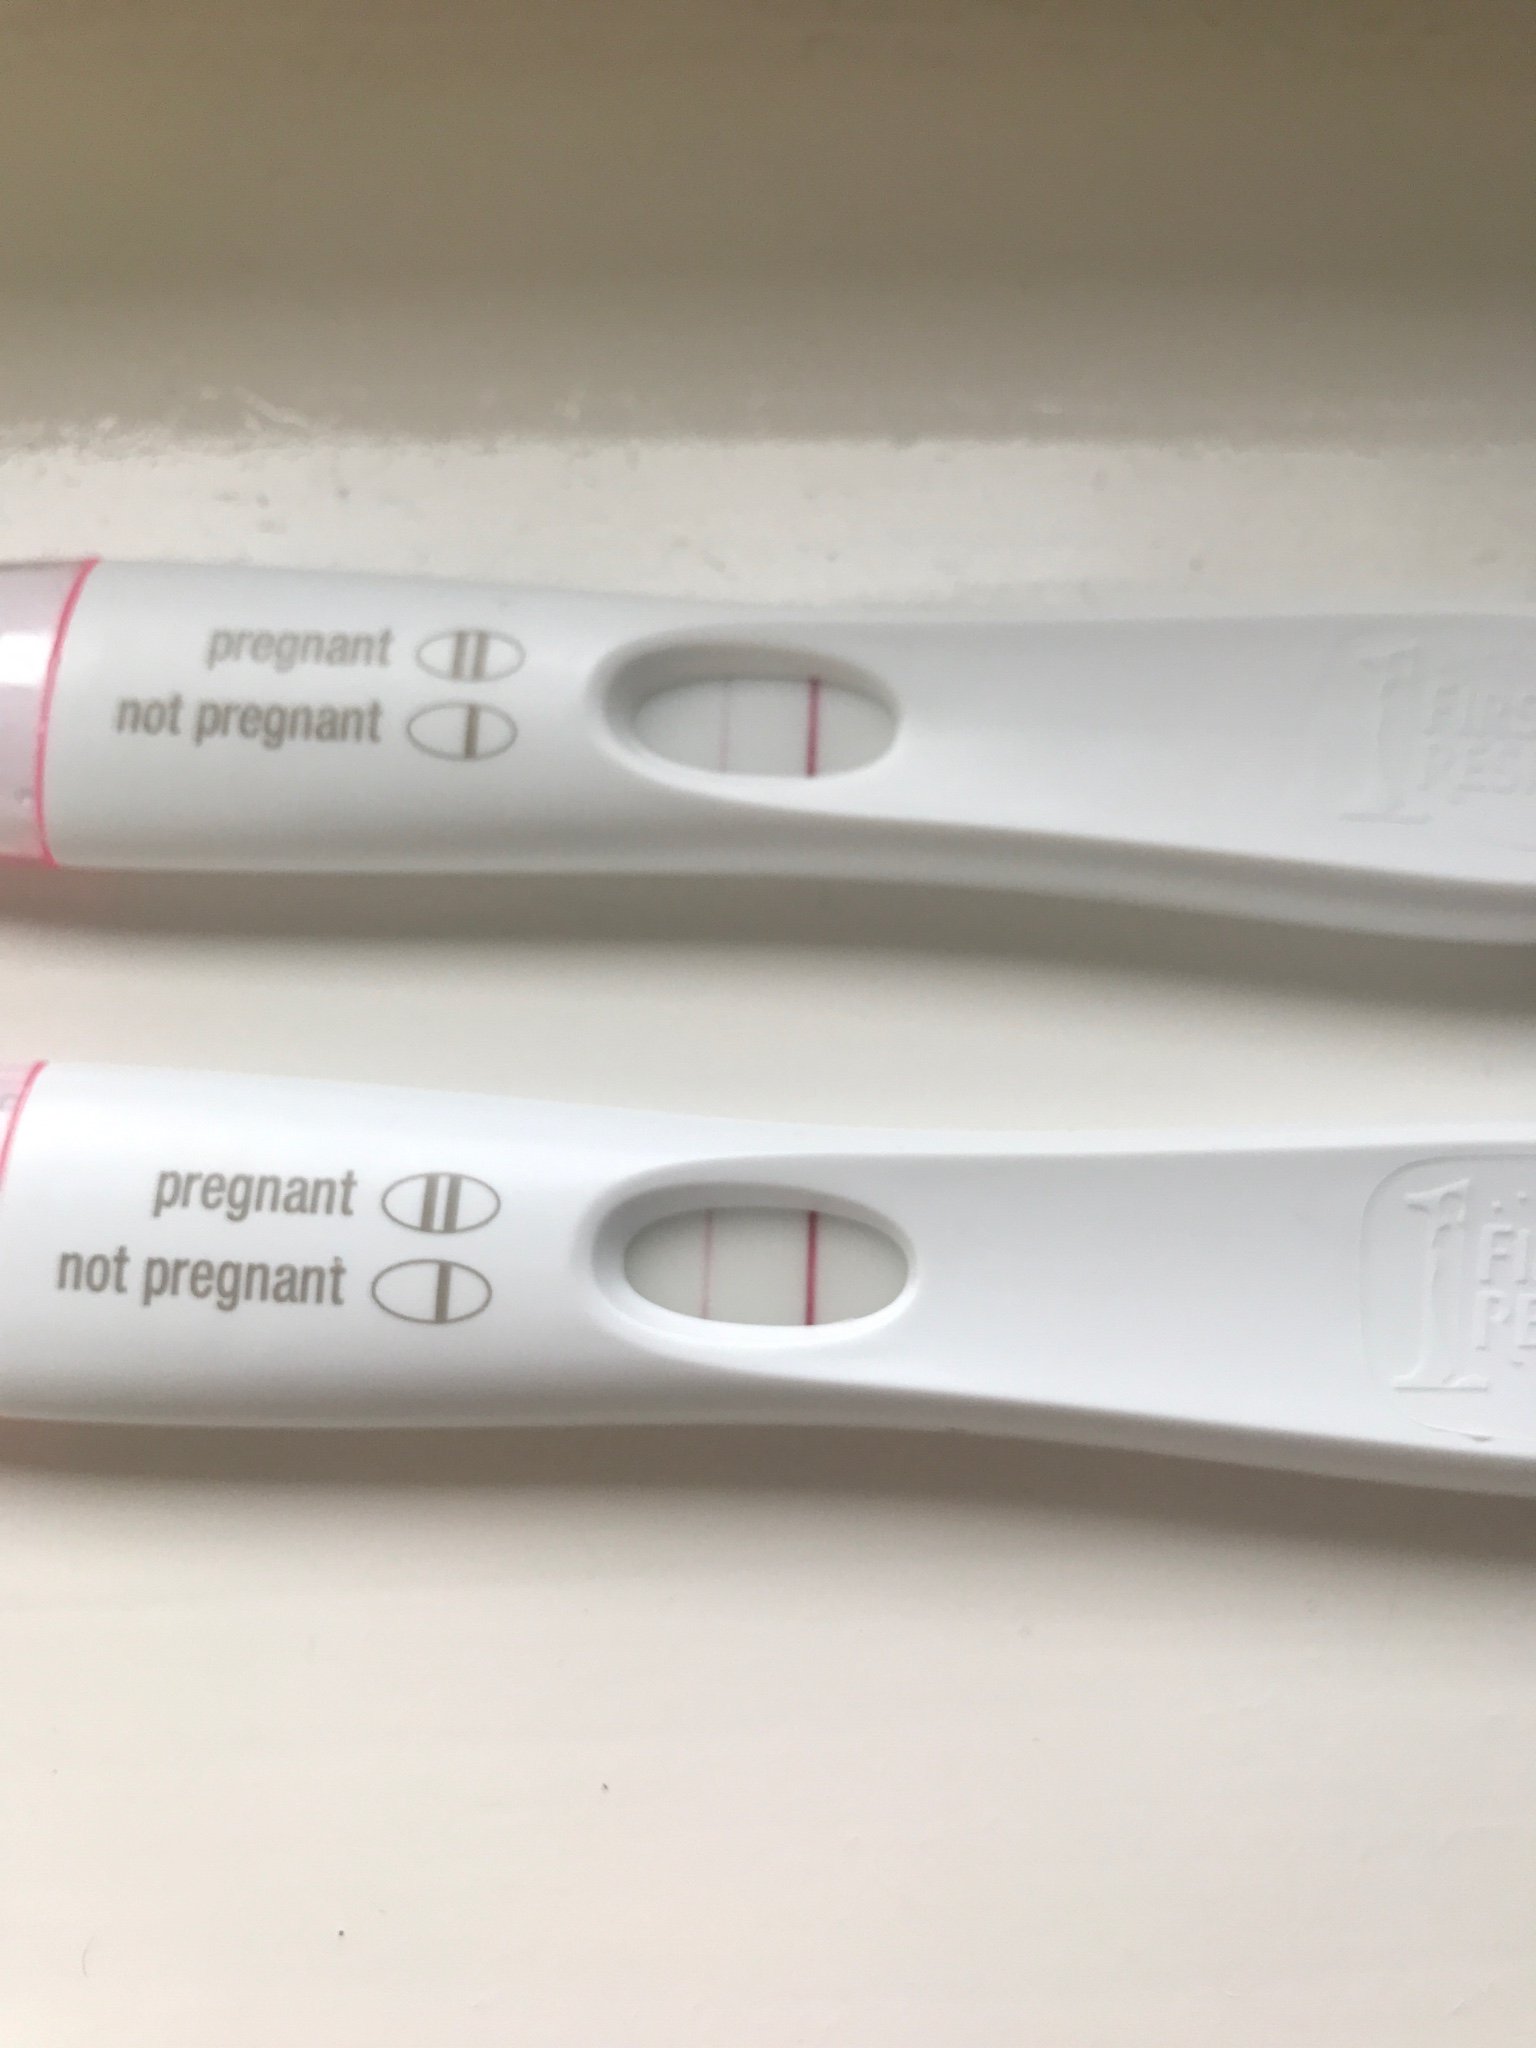 BFP positive day after period, implantation bleeding? - TTC While